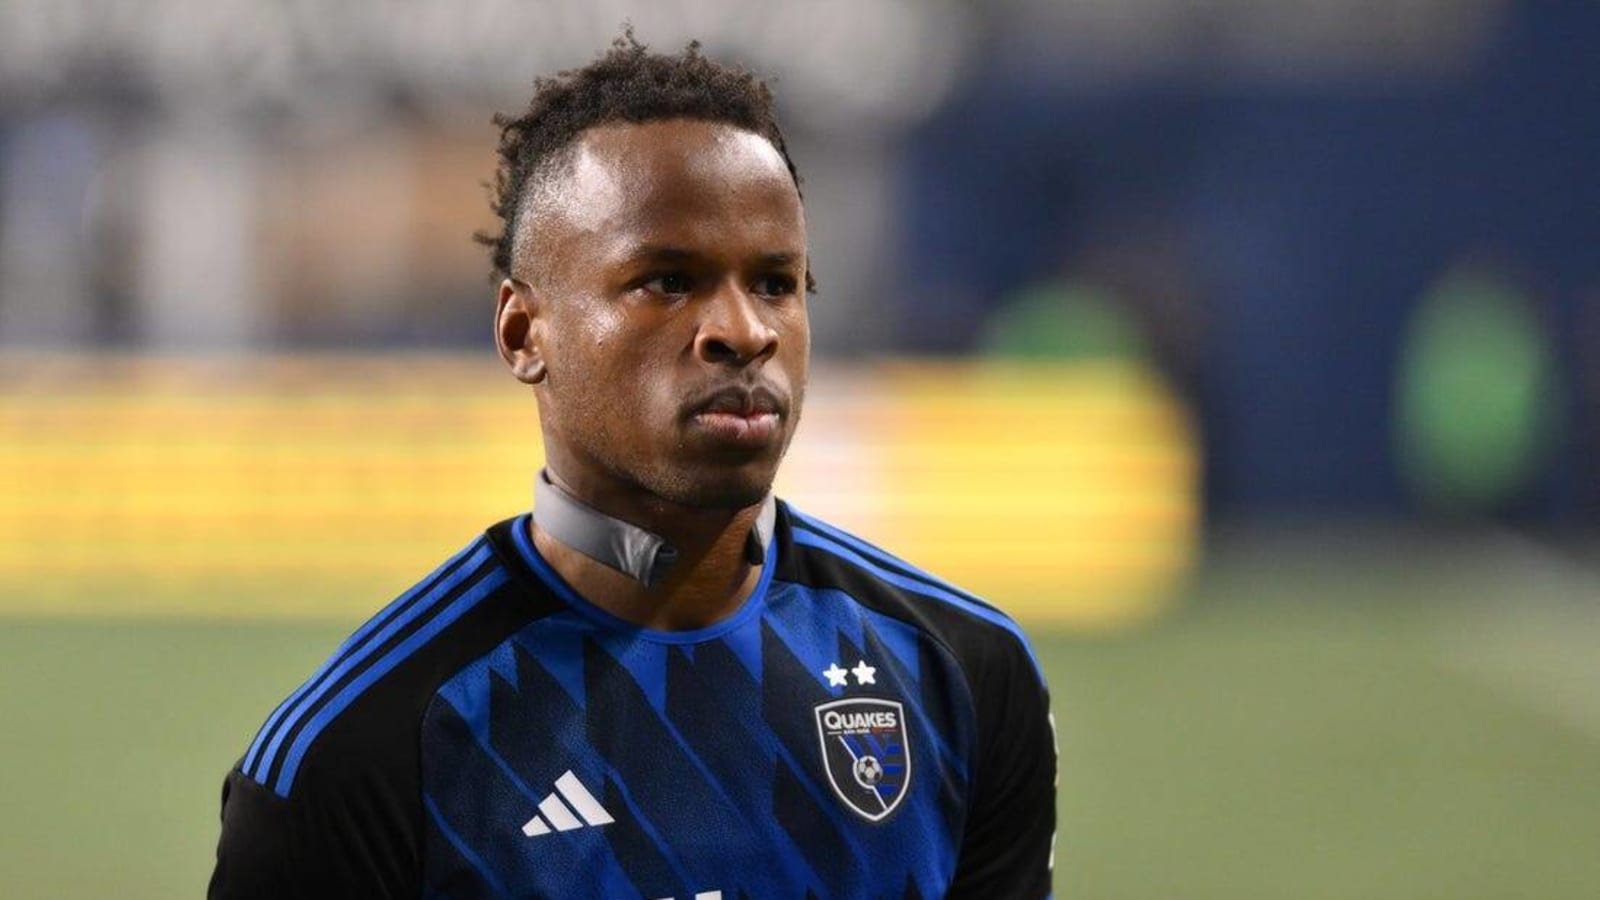 Earthquakes hungry for another road win in visit to Rapids